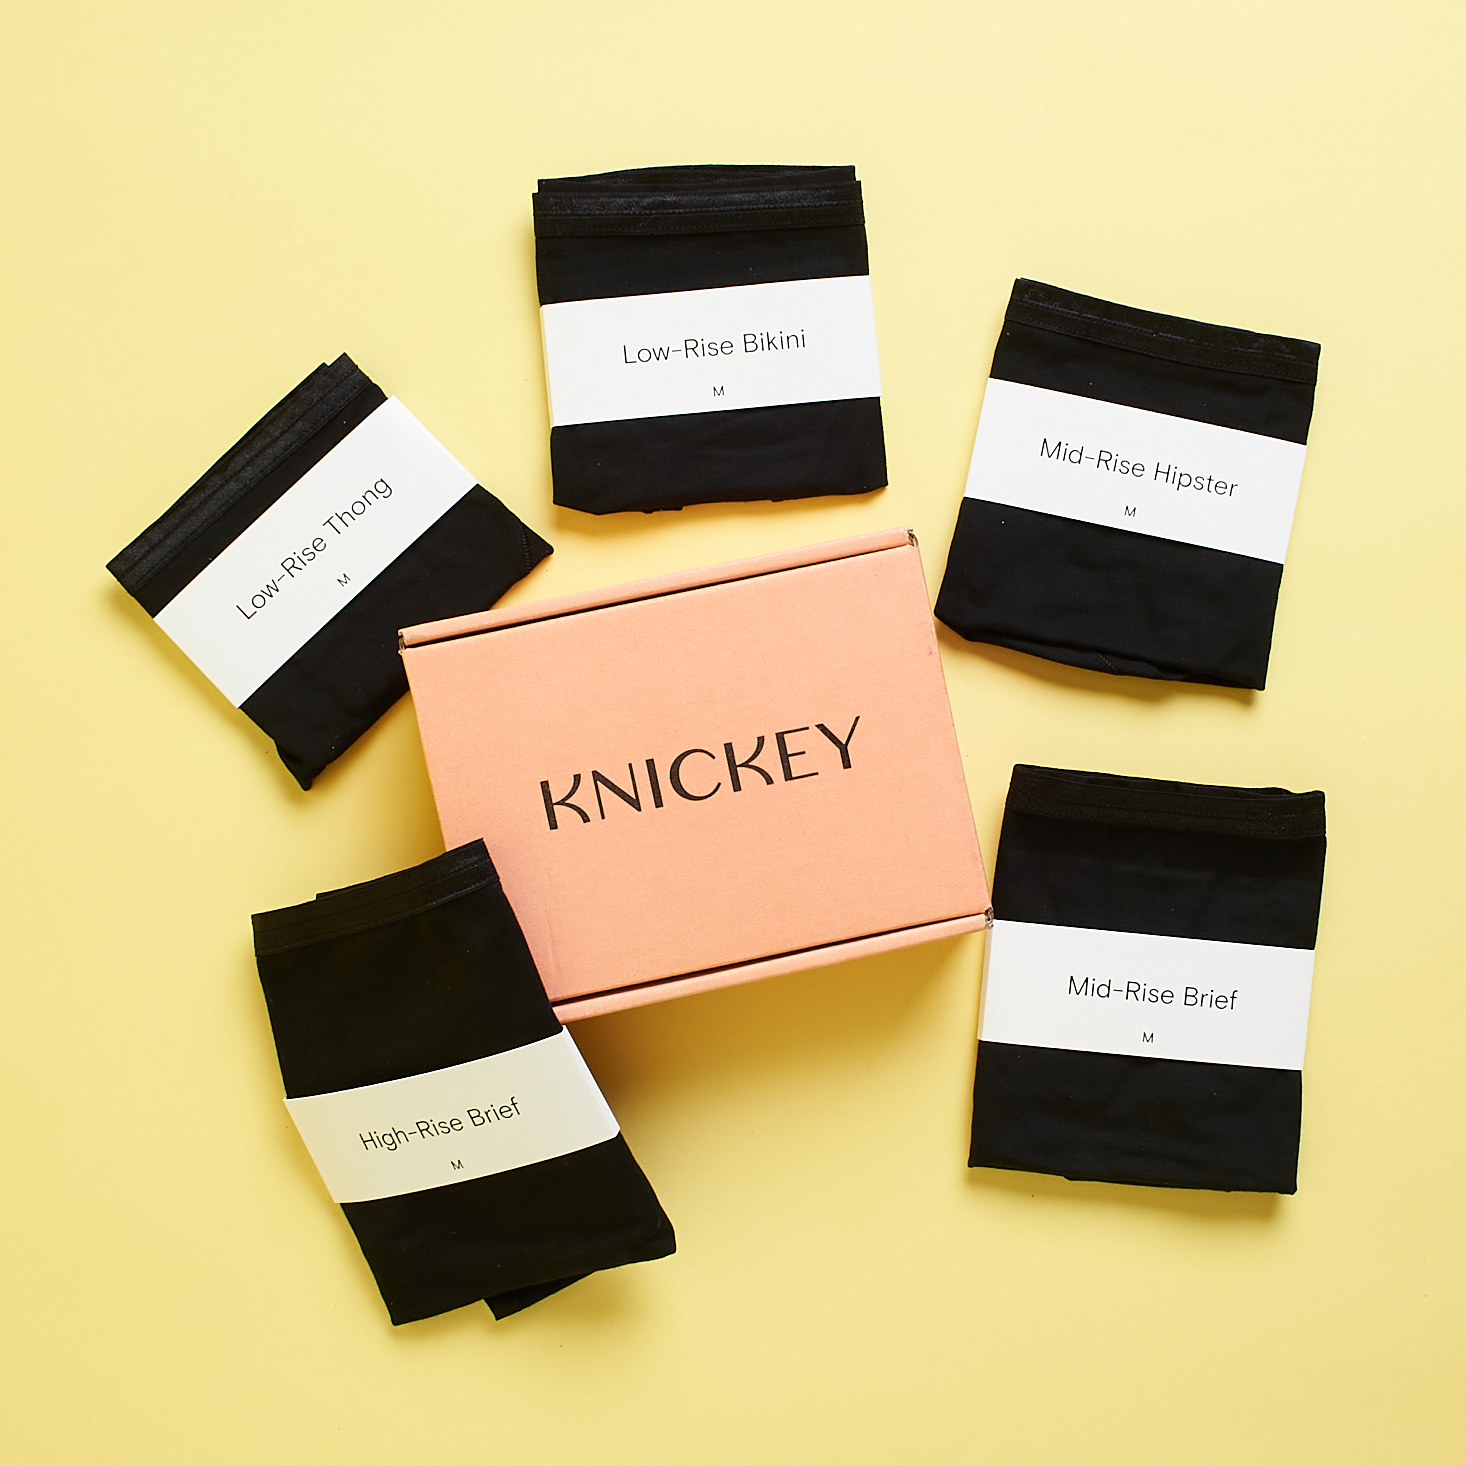 My Knickey Review — Organic Cotton Underwear With a Focus on